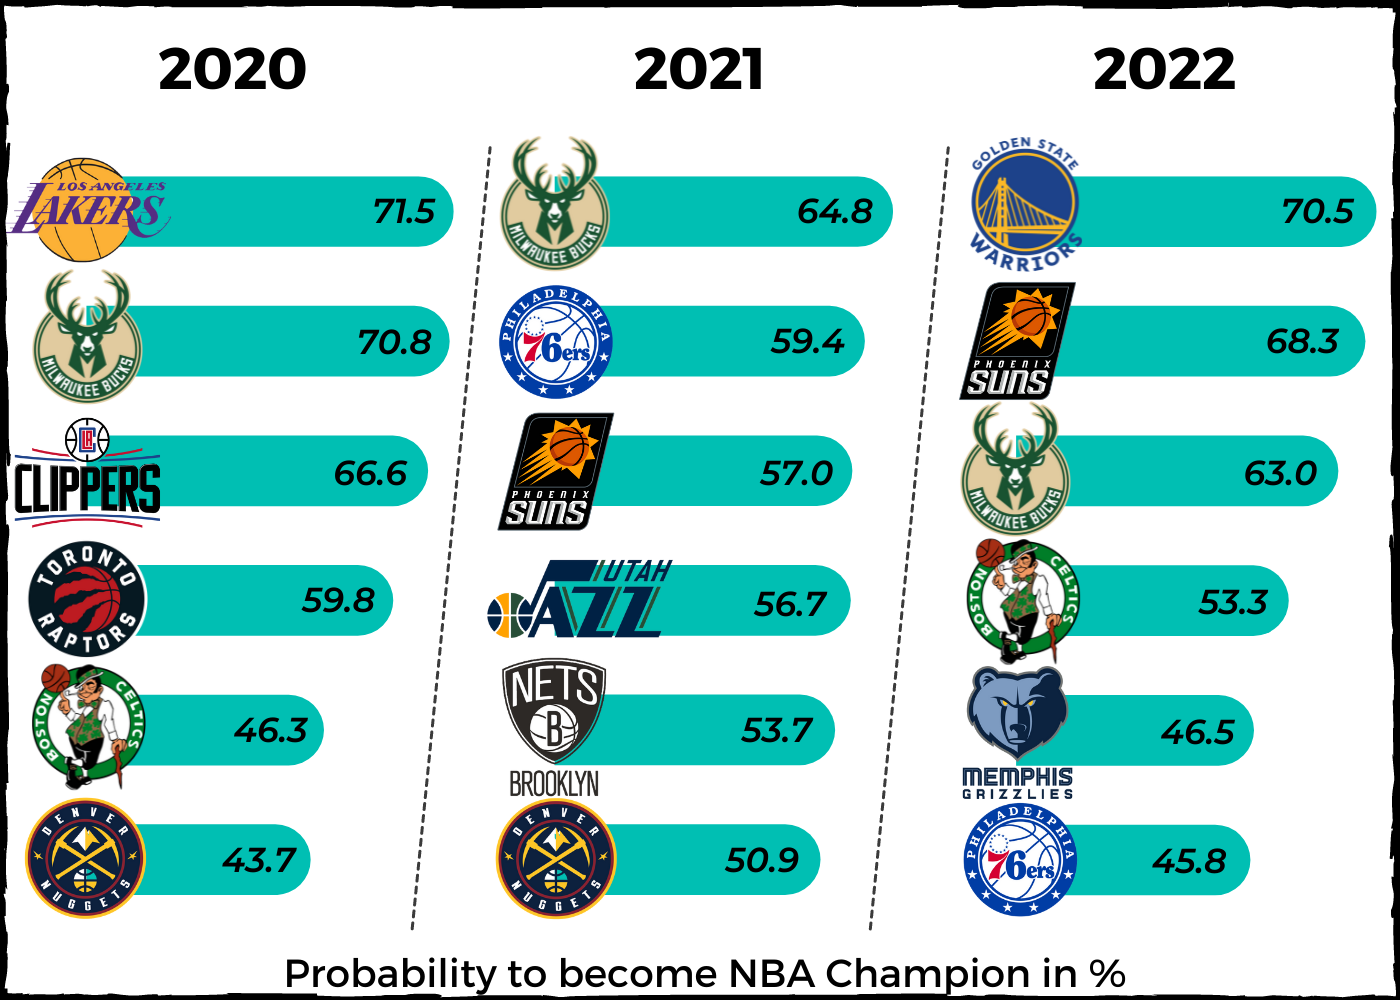 Machine Learning Predictions for the 2020–2022 Seasons